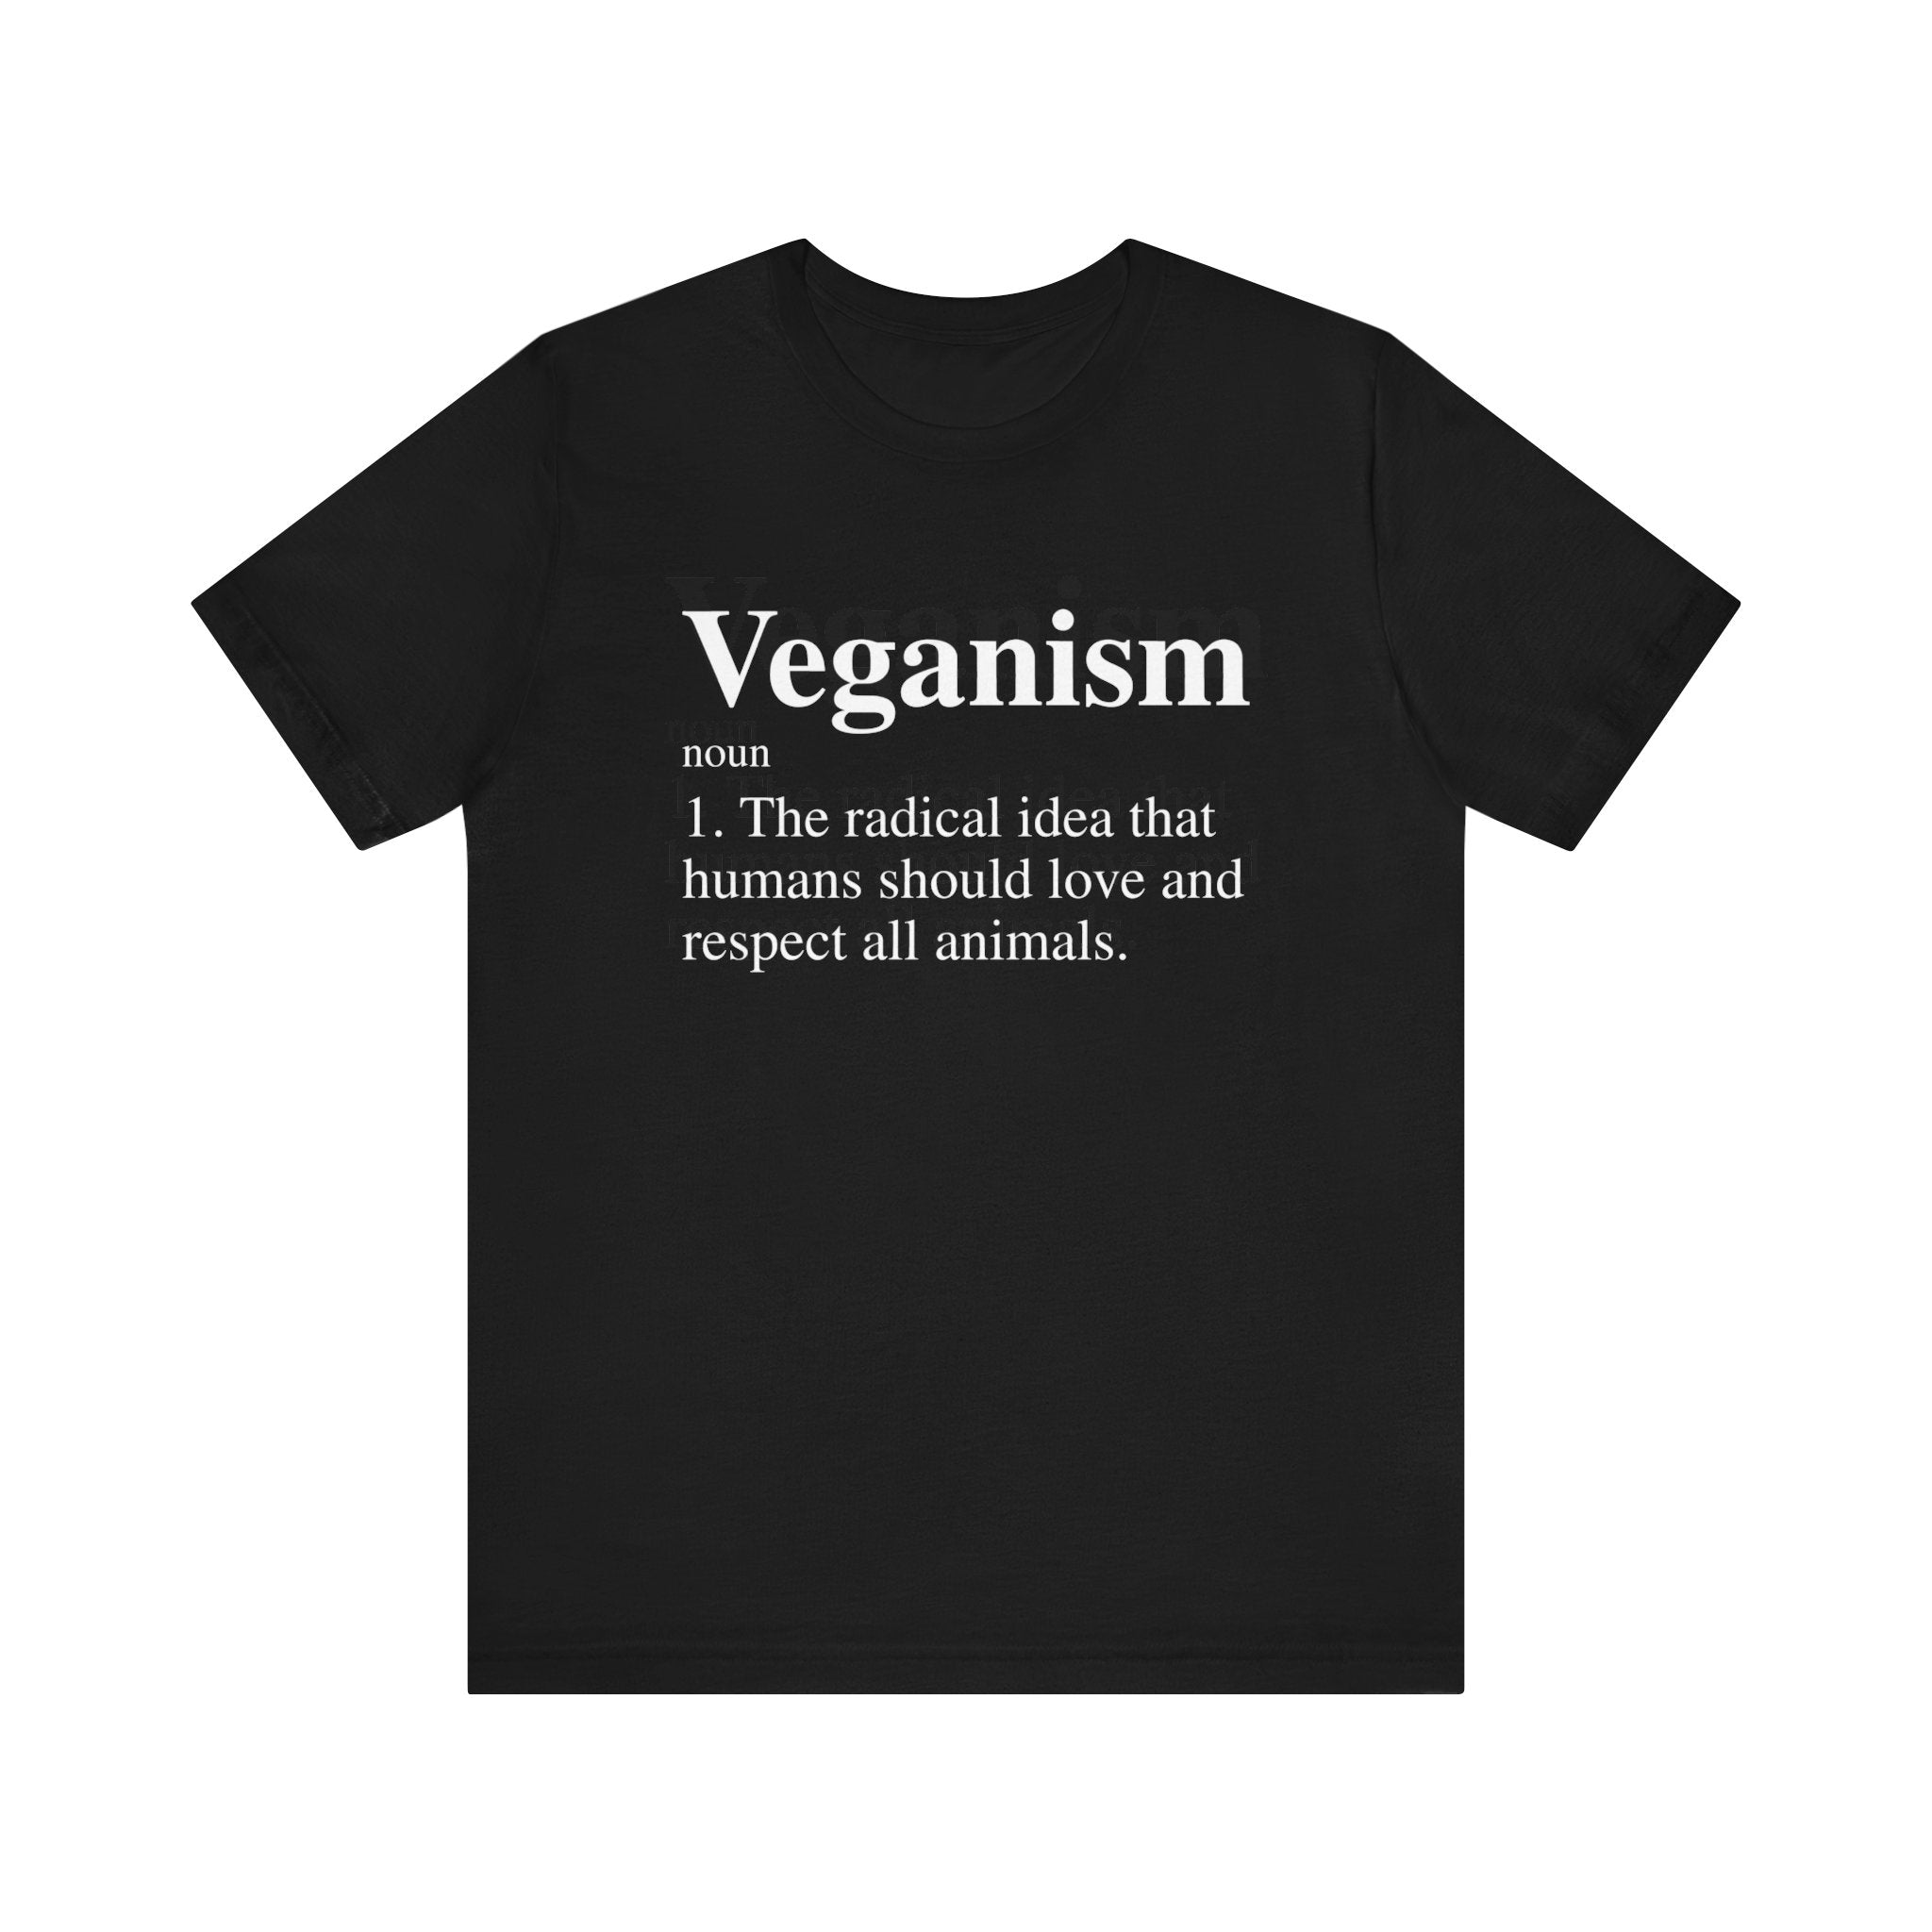 Black unisex Veganism T-Shirt with the word "veganism" and its definition printed in white text on the front.